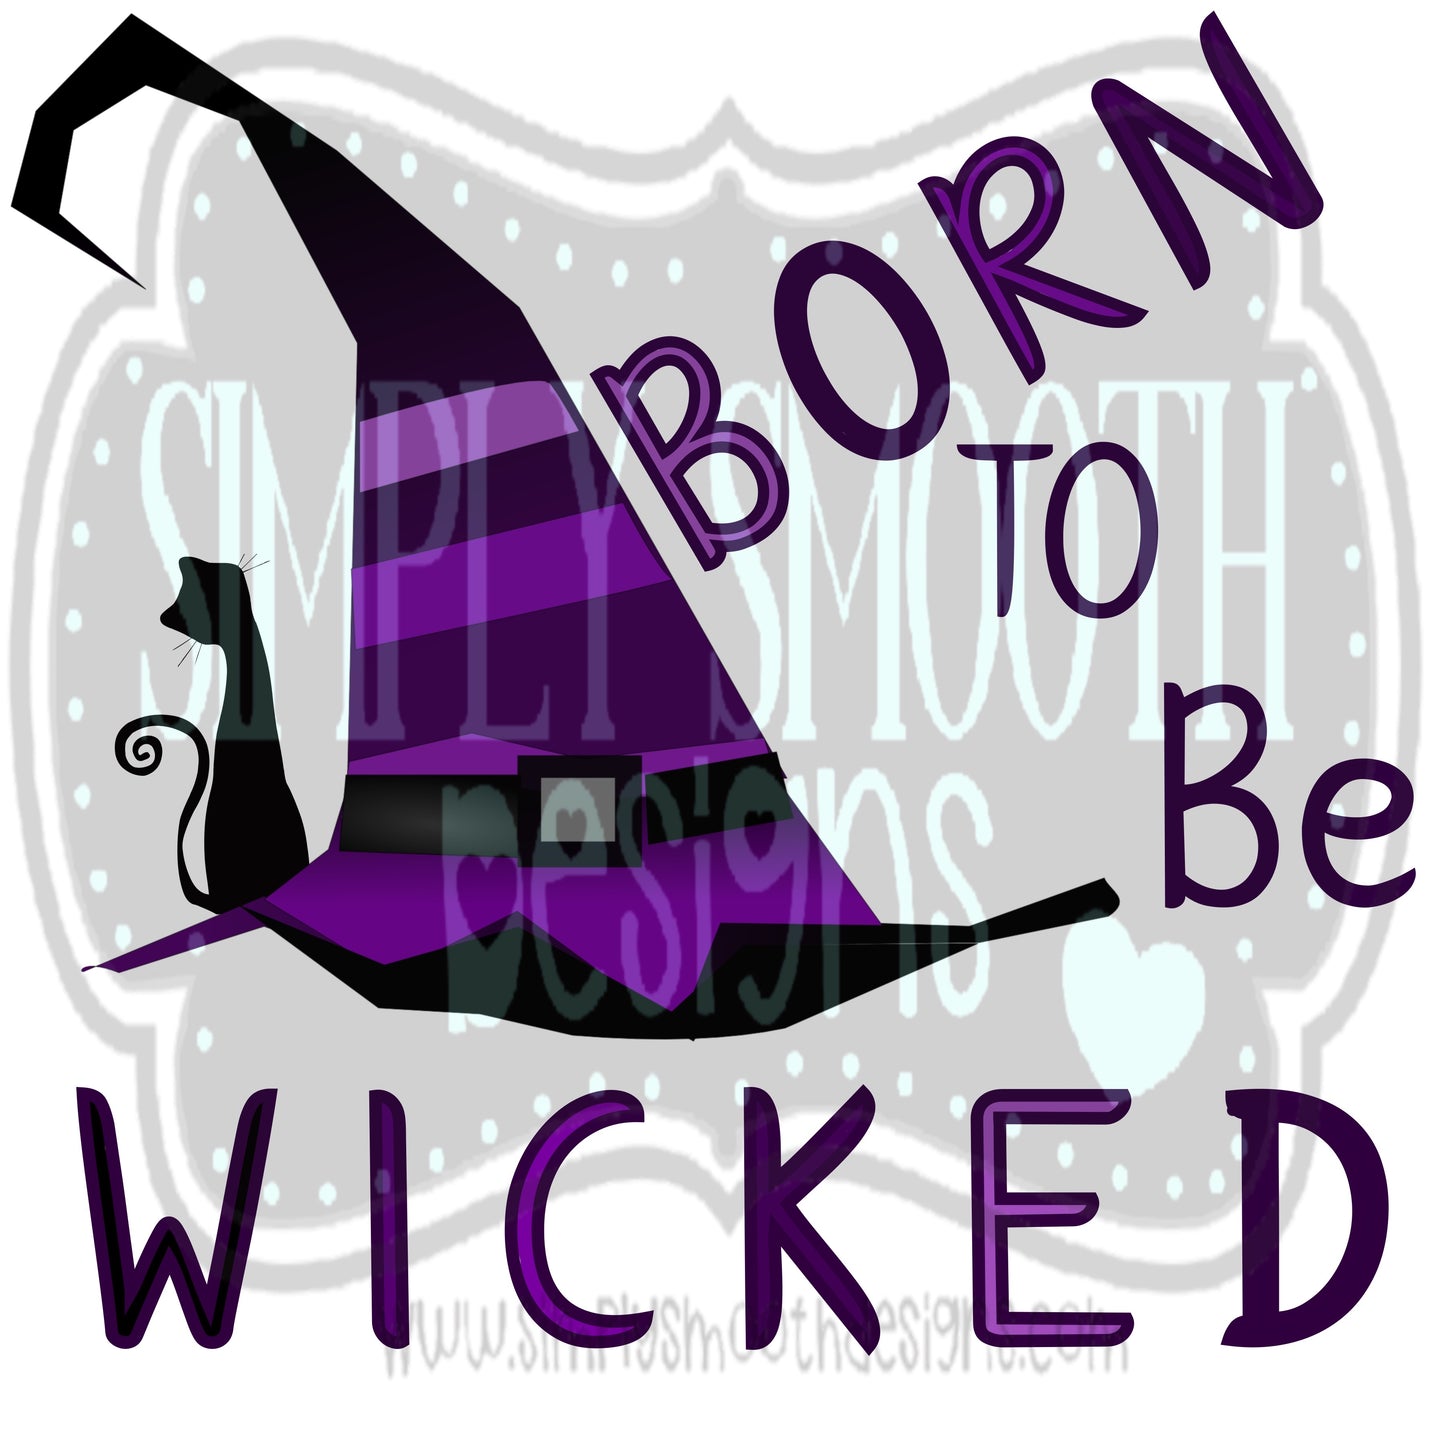 Born to be wicked